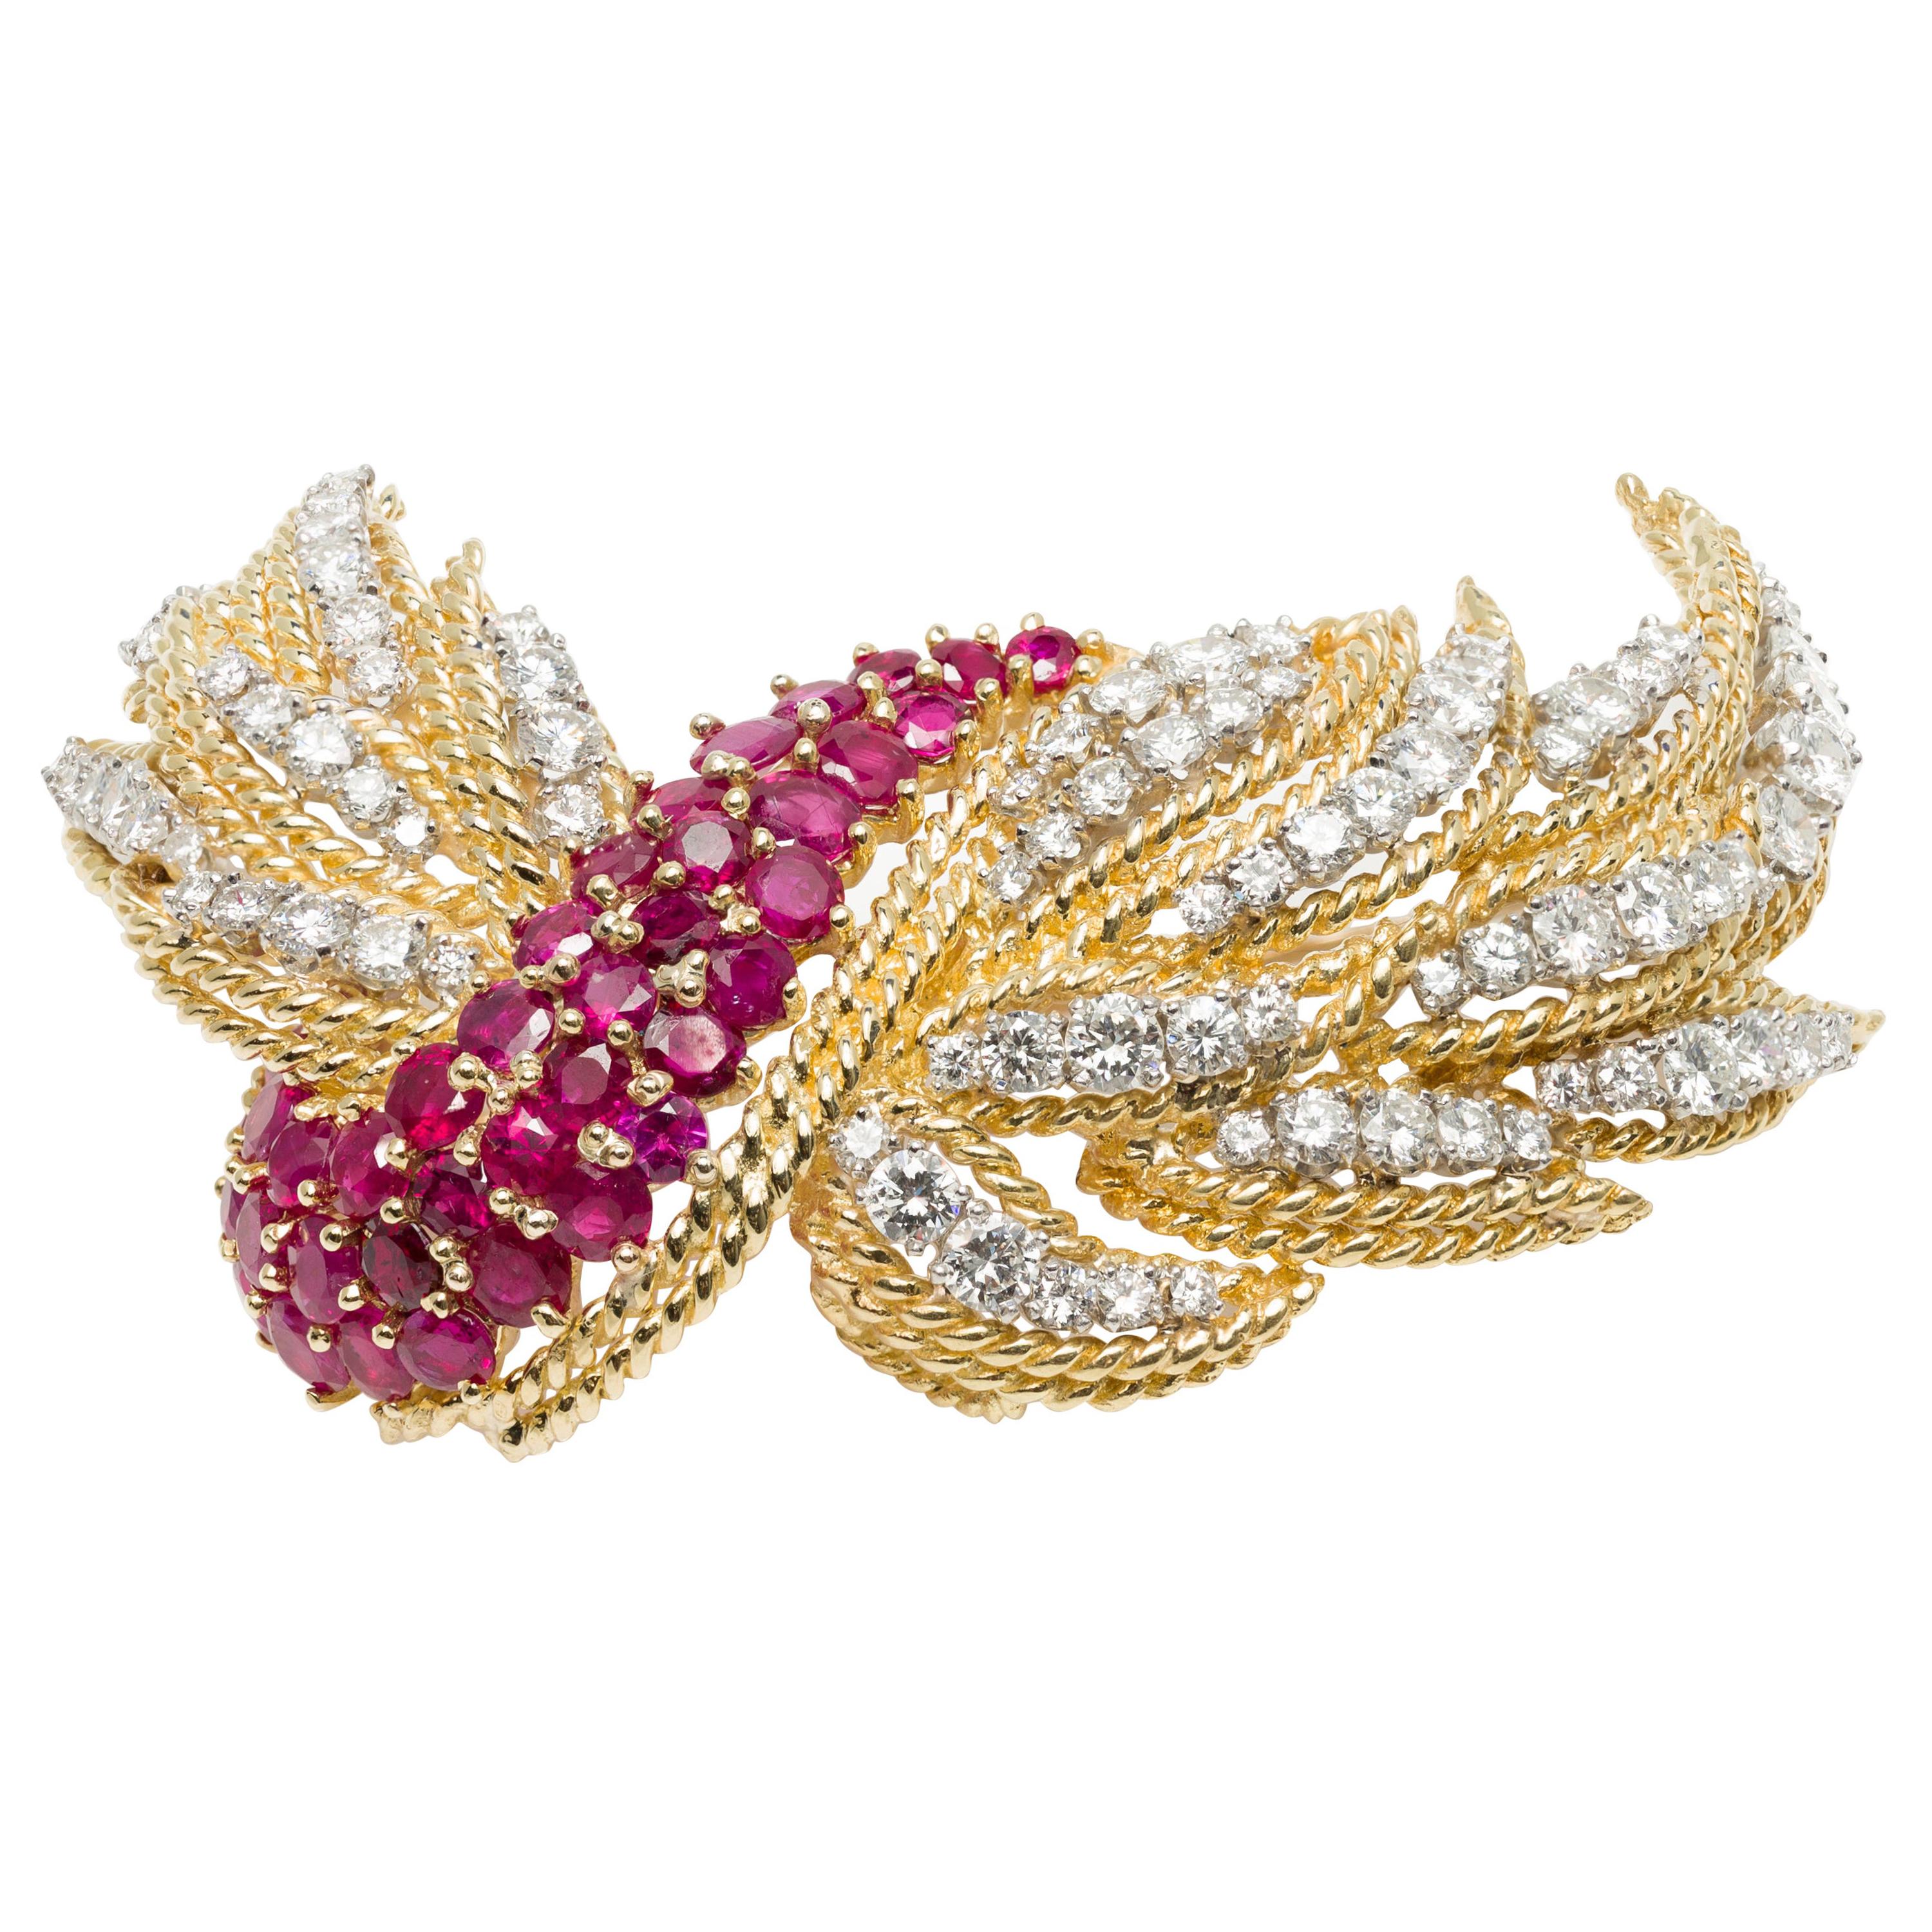 Italian Midcentury Burmese Ruby and Diamond Brooch in 18k Yellow and White Gold For Sale